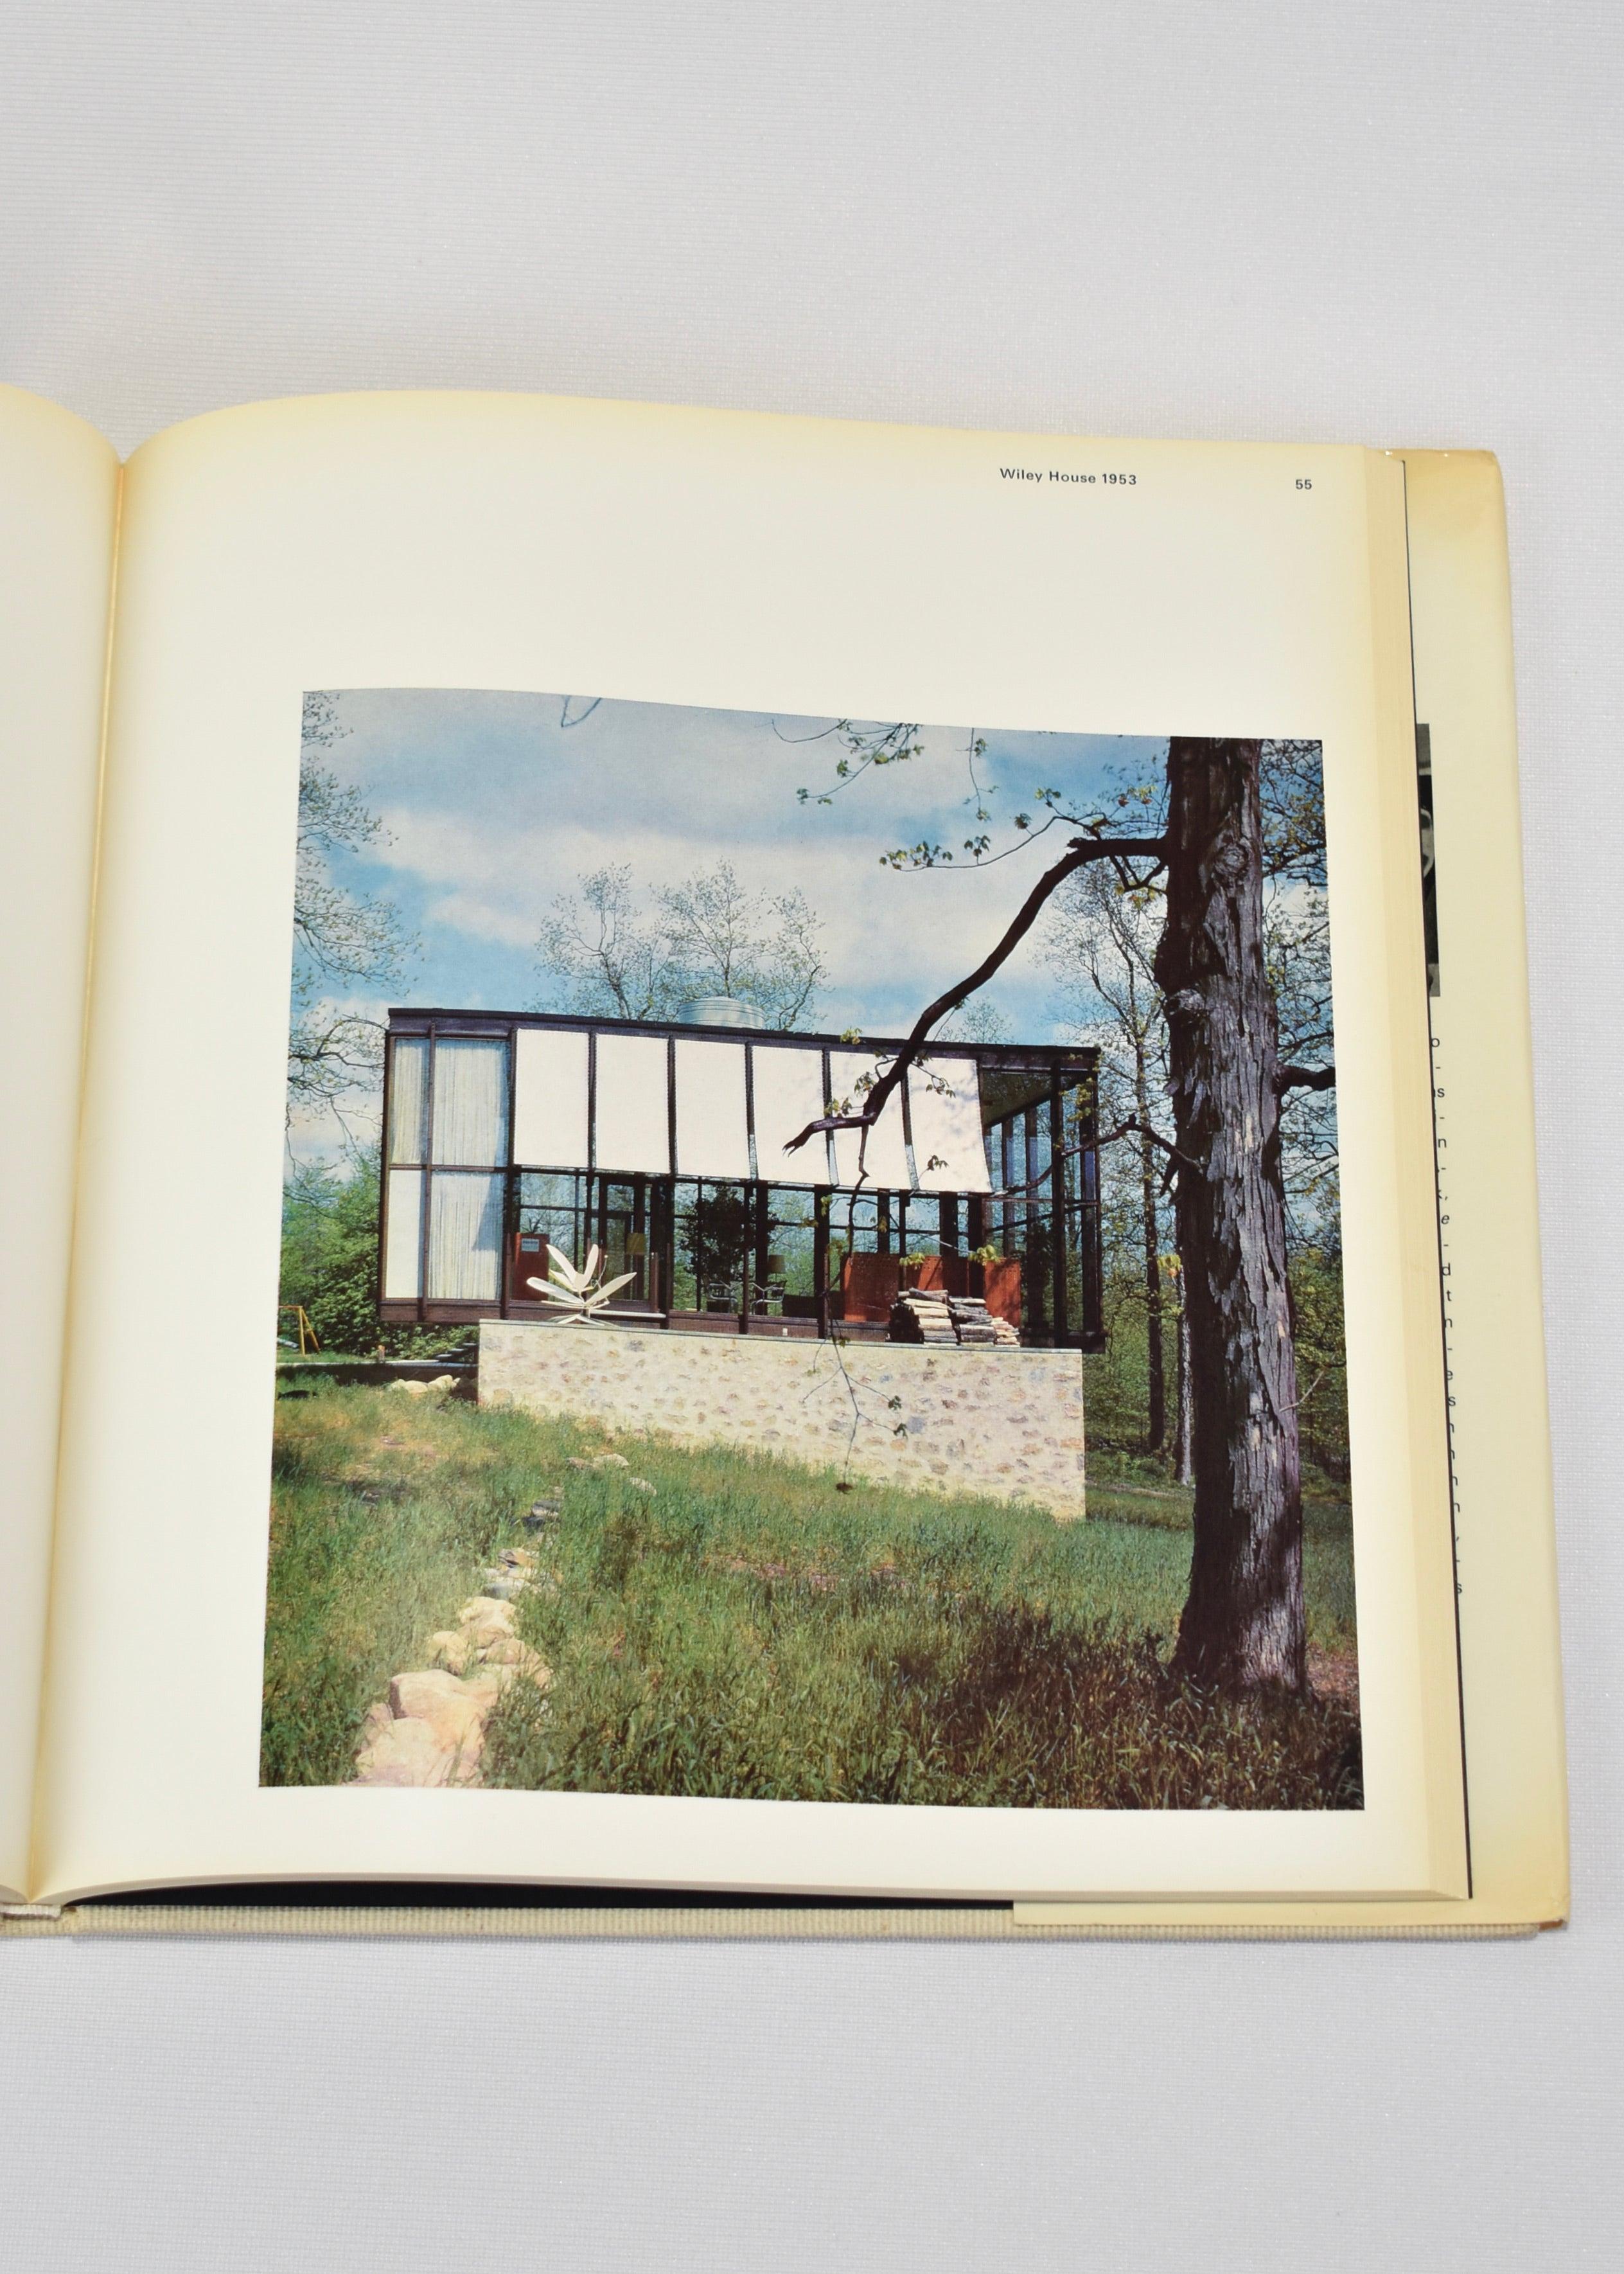 Vintage hardback coffee table book featuring the work of architect Philip Johnson between 1949 and 1965. By Philip Johnson, published in 1966. Second edition, 115 pages.

